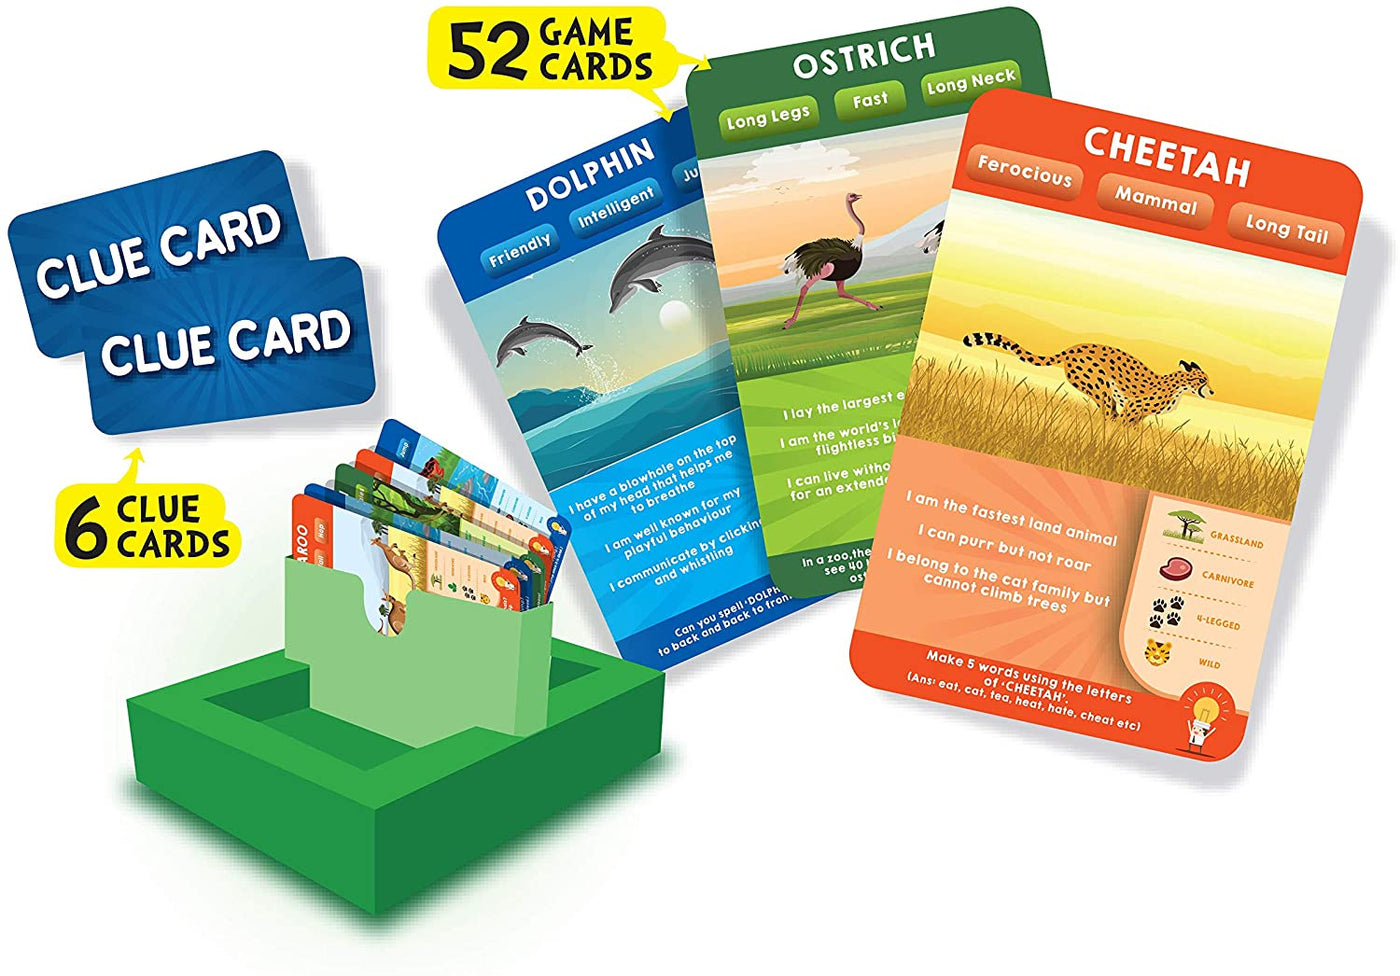 Skillmatics Educational Game : Animal Planet - Guess in 10 (Ages 6-99) | Card Game of Smart Questions | General Knowledge for Kids, Adults and Families | Gifts for Boys and Girls